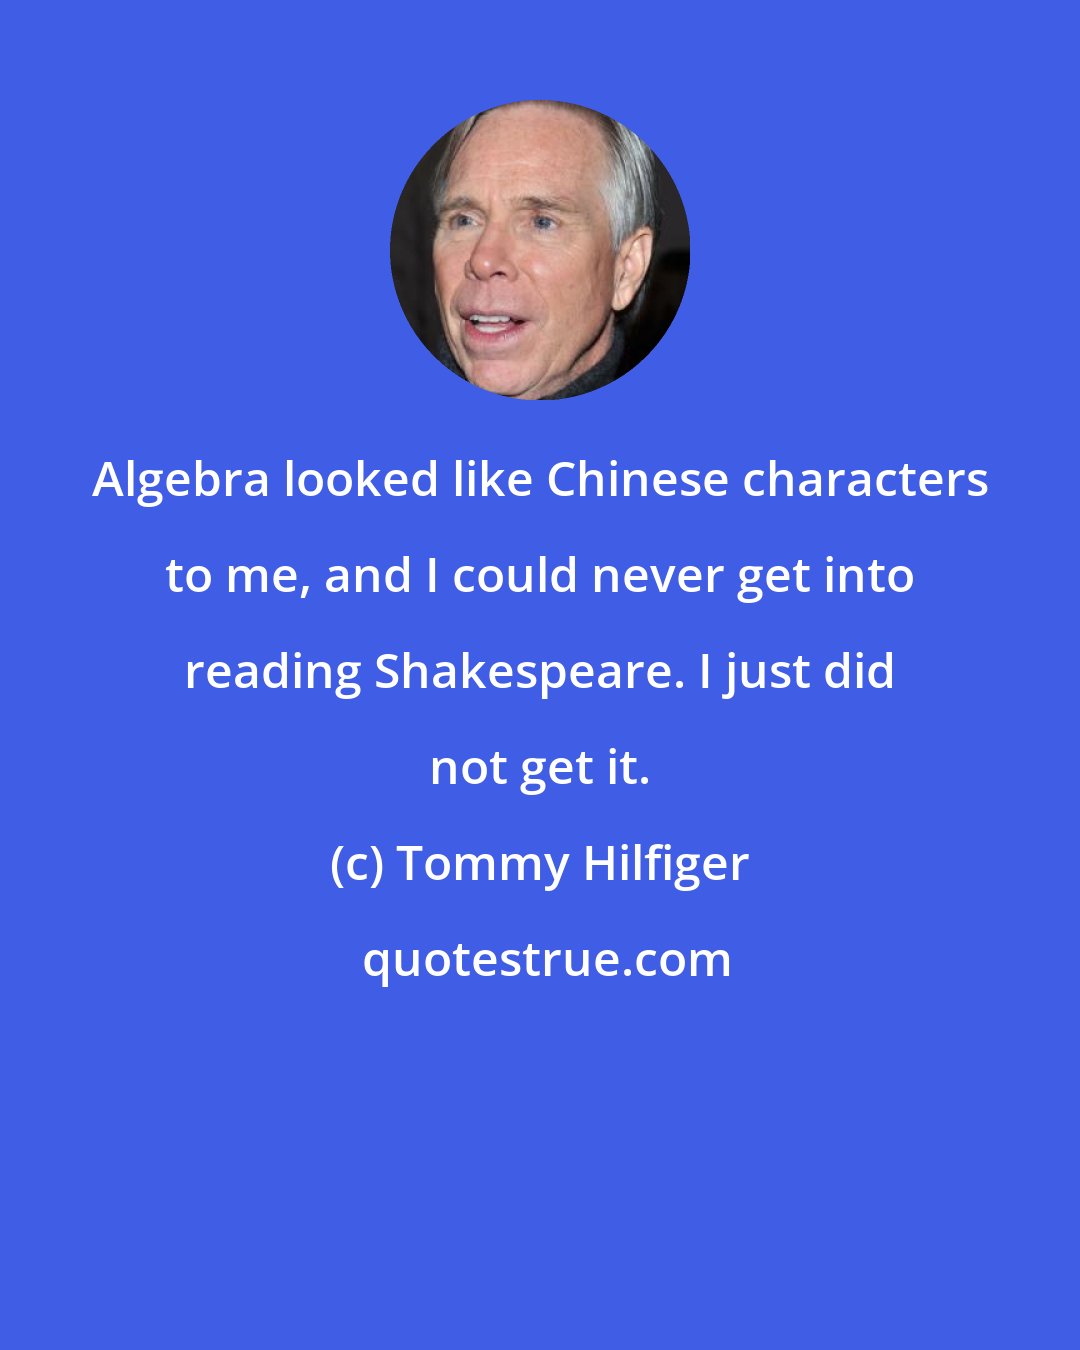 Tommy Hilfiger: Algebra looked like Chinese characters to me, and I could never get into reading Shakespeare. I just did not get it.